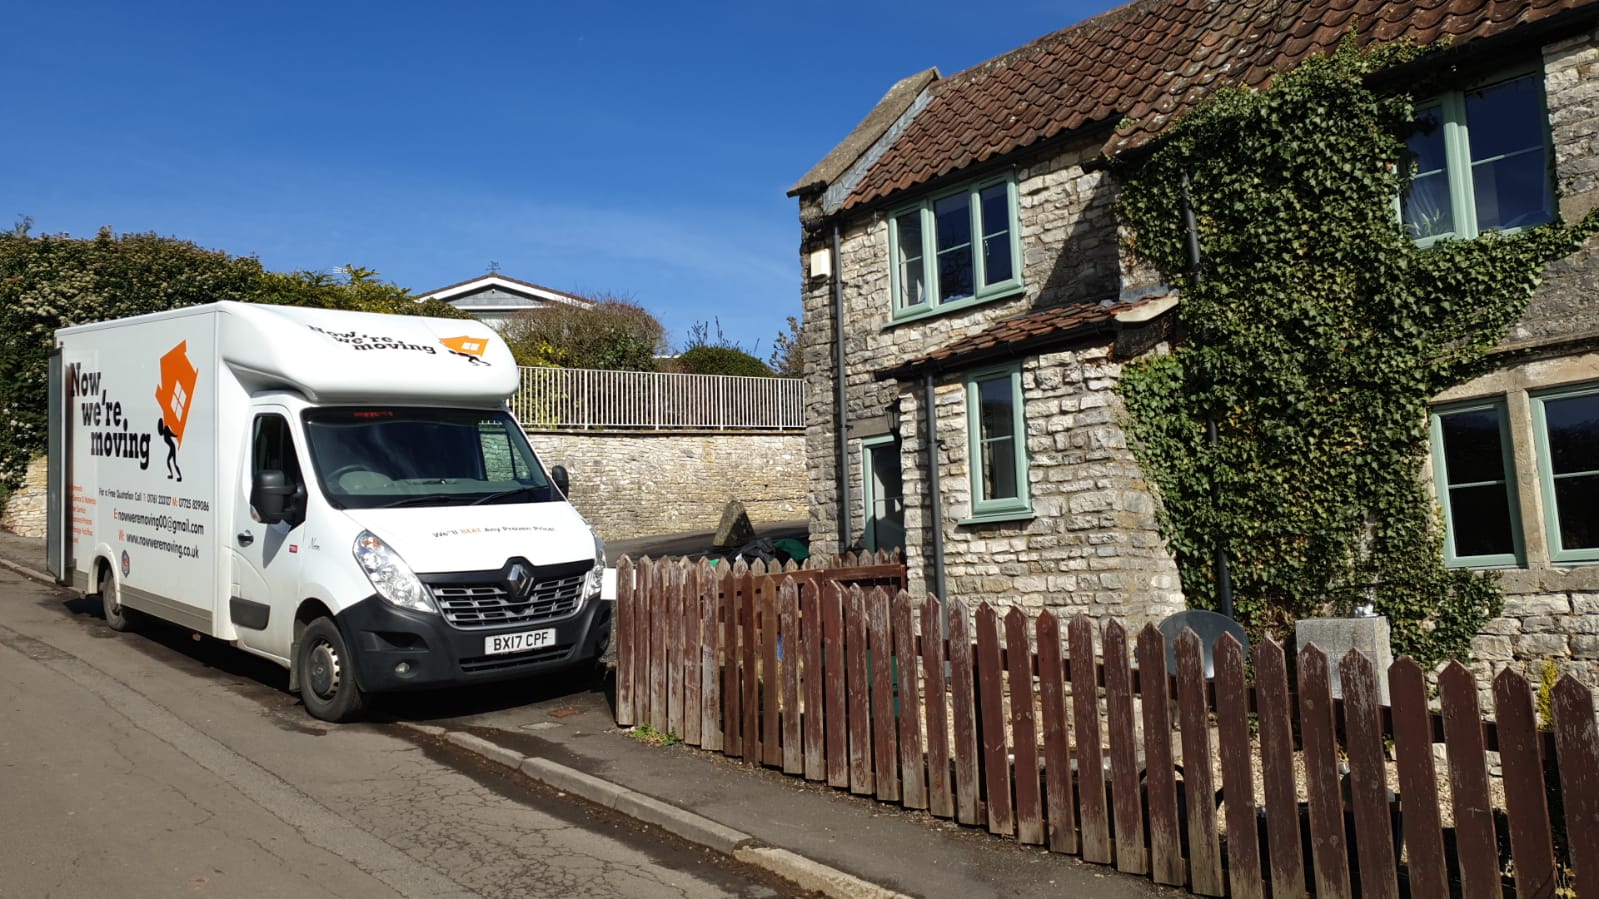 Now We're Moving Moving Reviews Bath